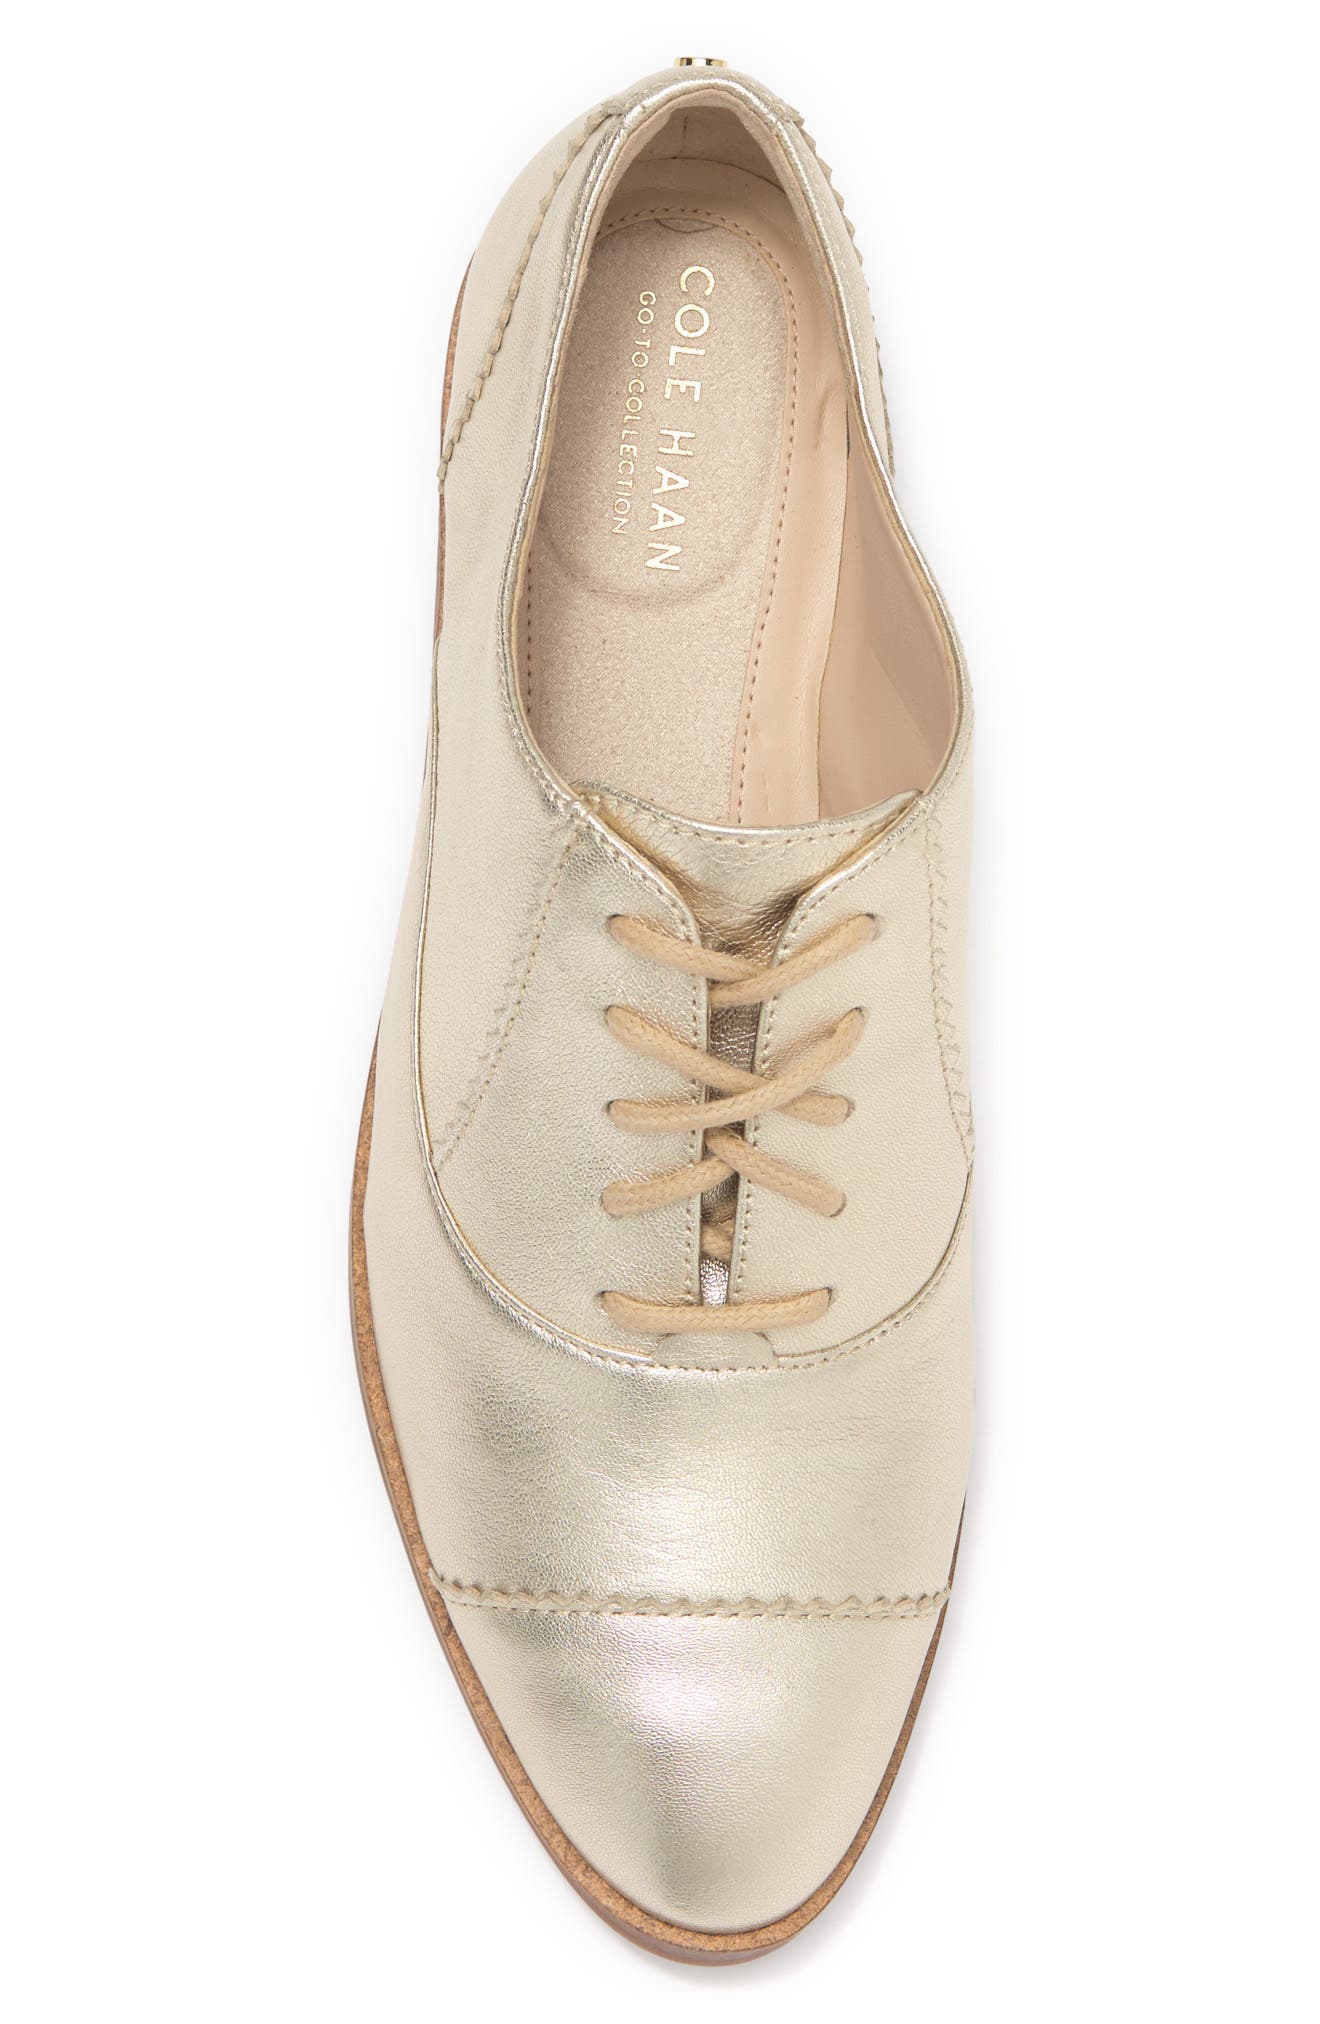 Cole Haan Women's The Go-to Arden Oxford